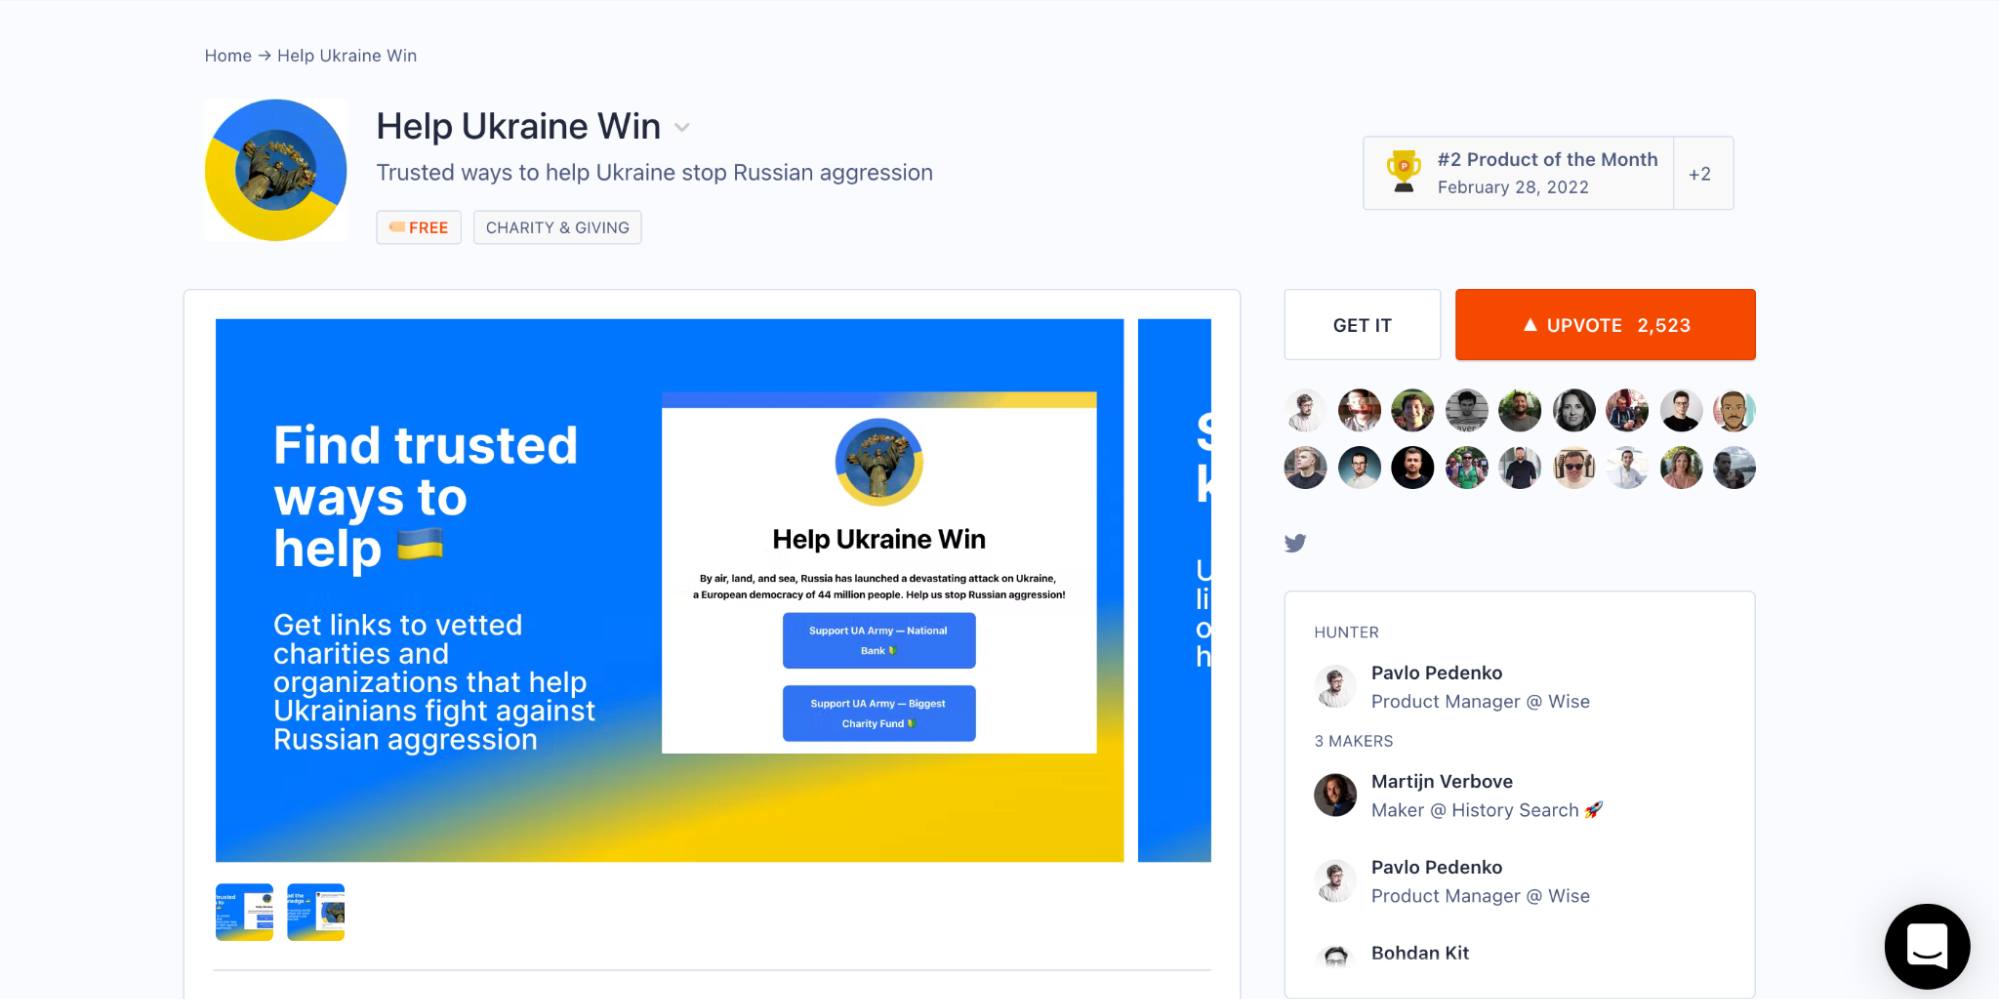 Wise's Help Ukraine Win product on Product Hunt